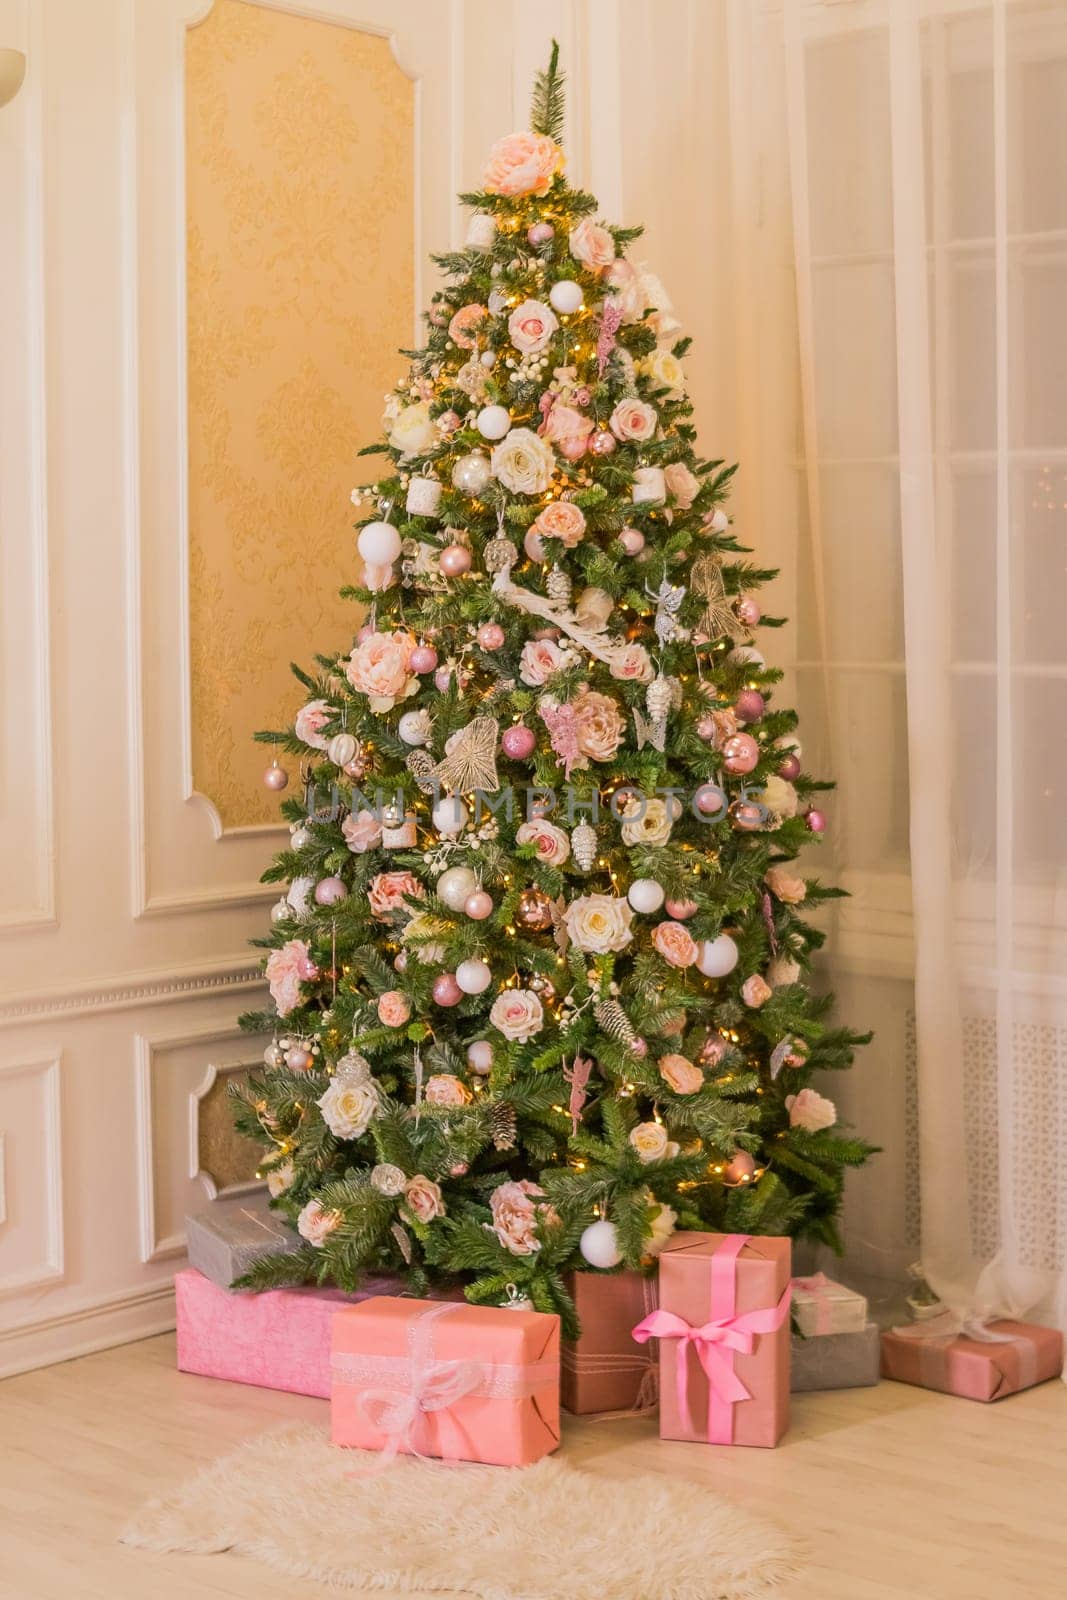 Pastel christmas.pinkChristmas gift box with golden ribbon next to decorated Christmas tree